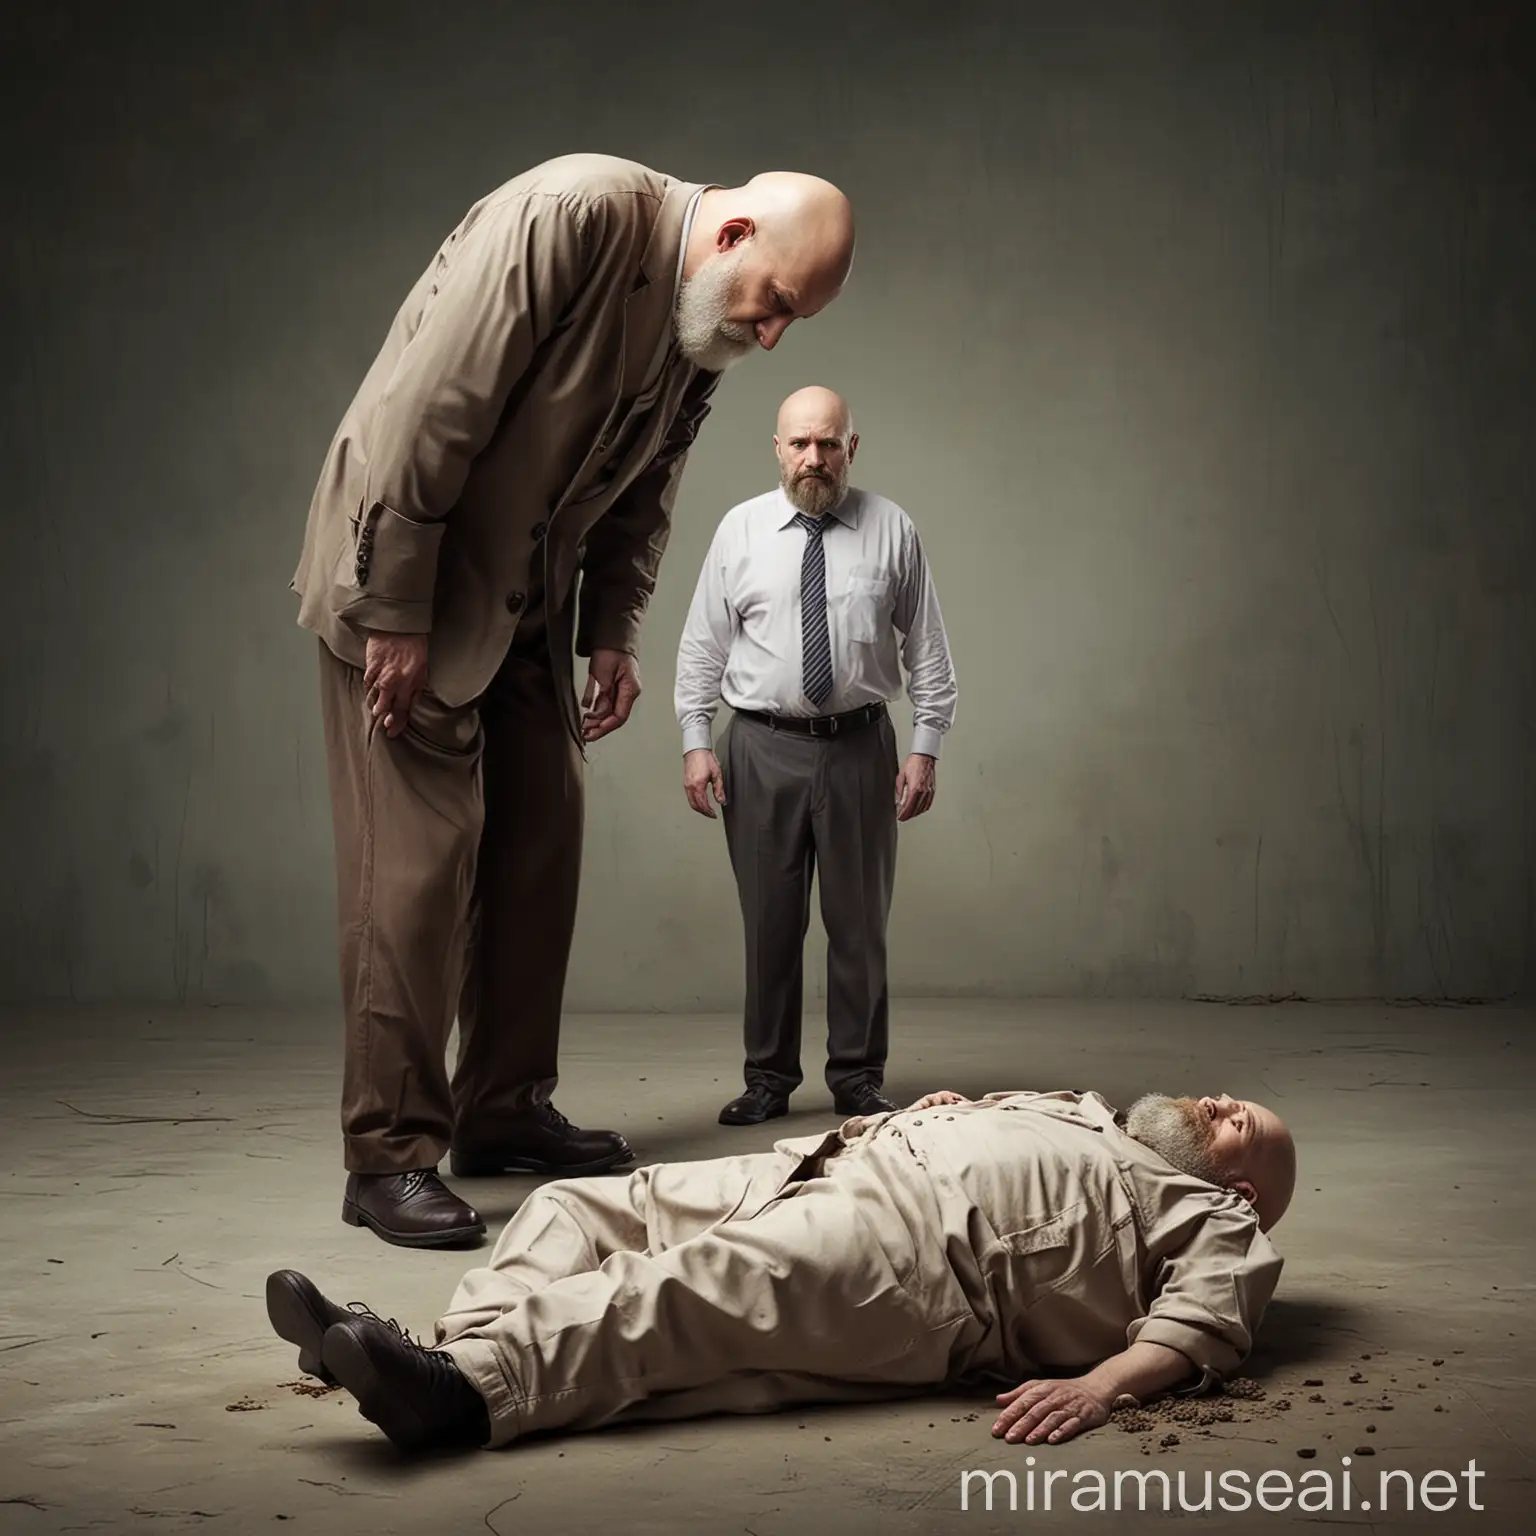 old man standing over dead bald bearded man
